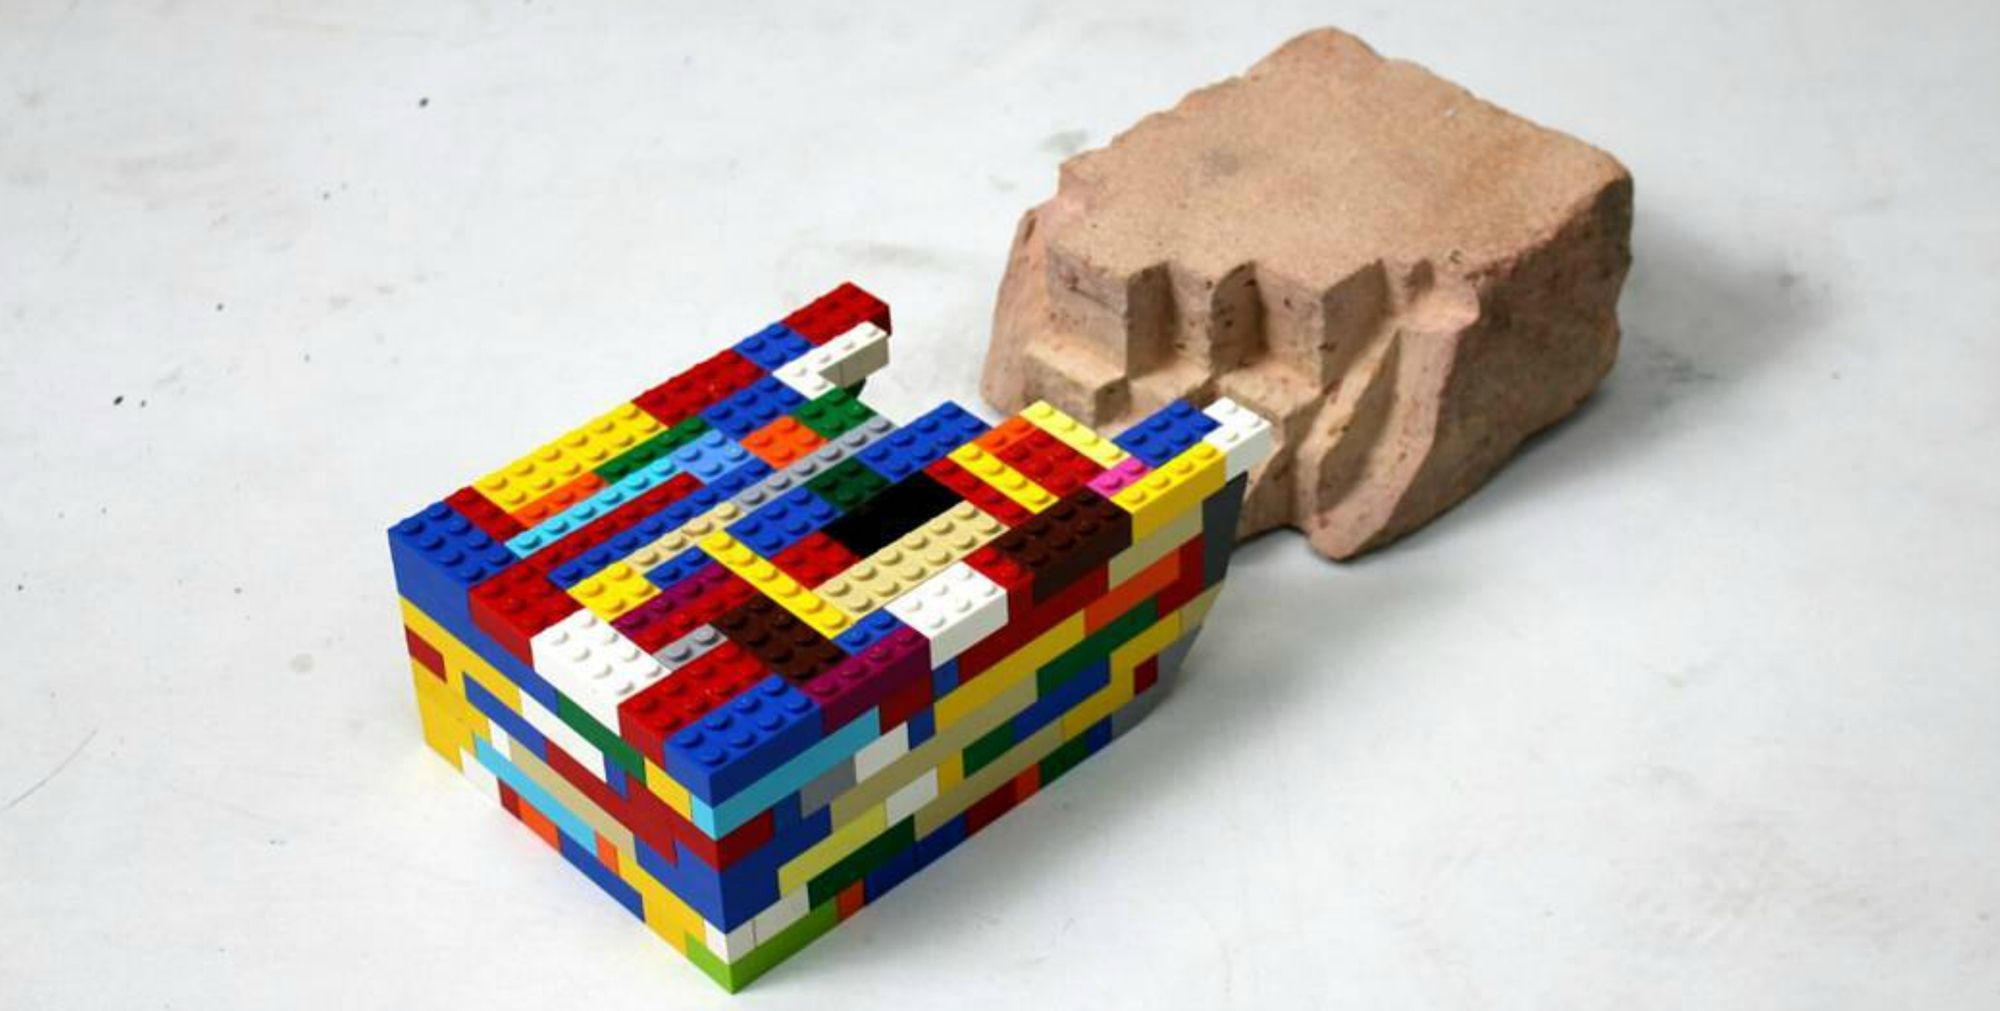 These Lego Bricks Can Save Crumbling Structures in a Way - Arch2O.com